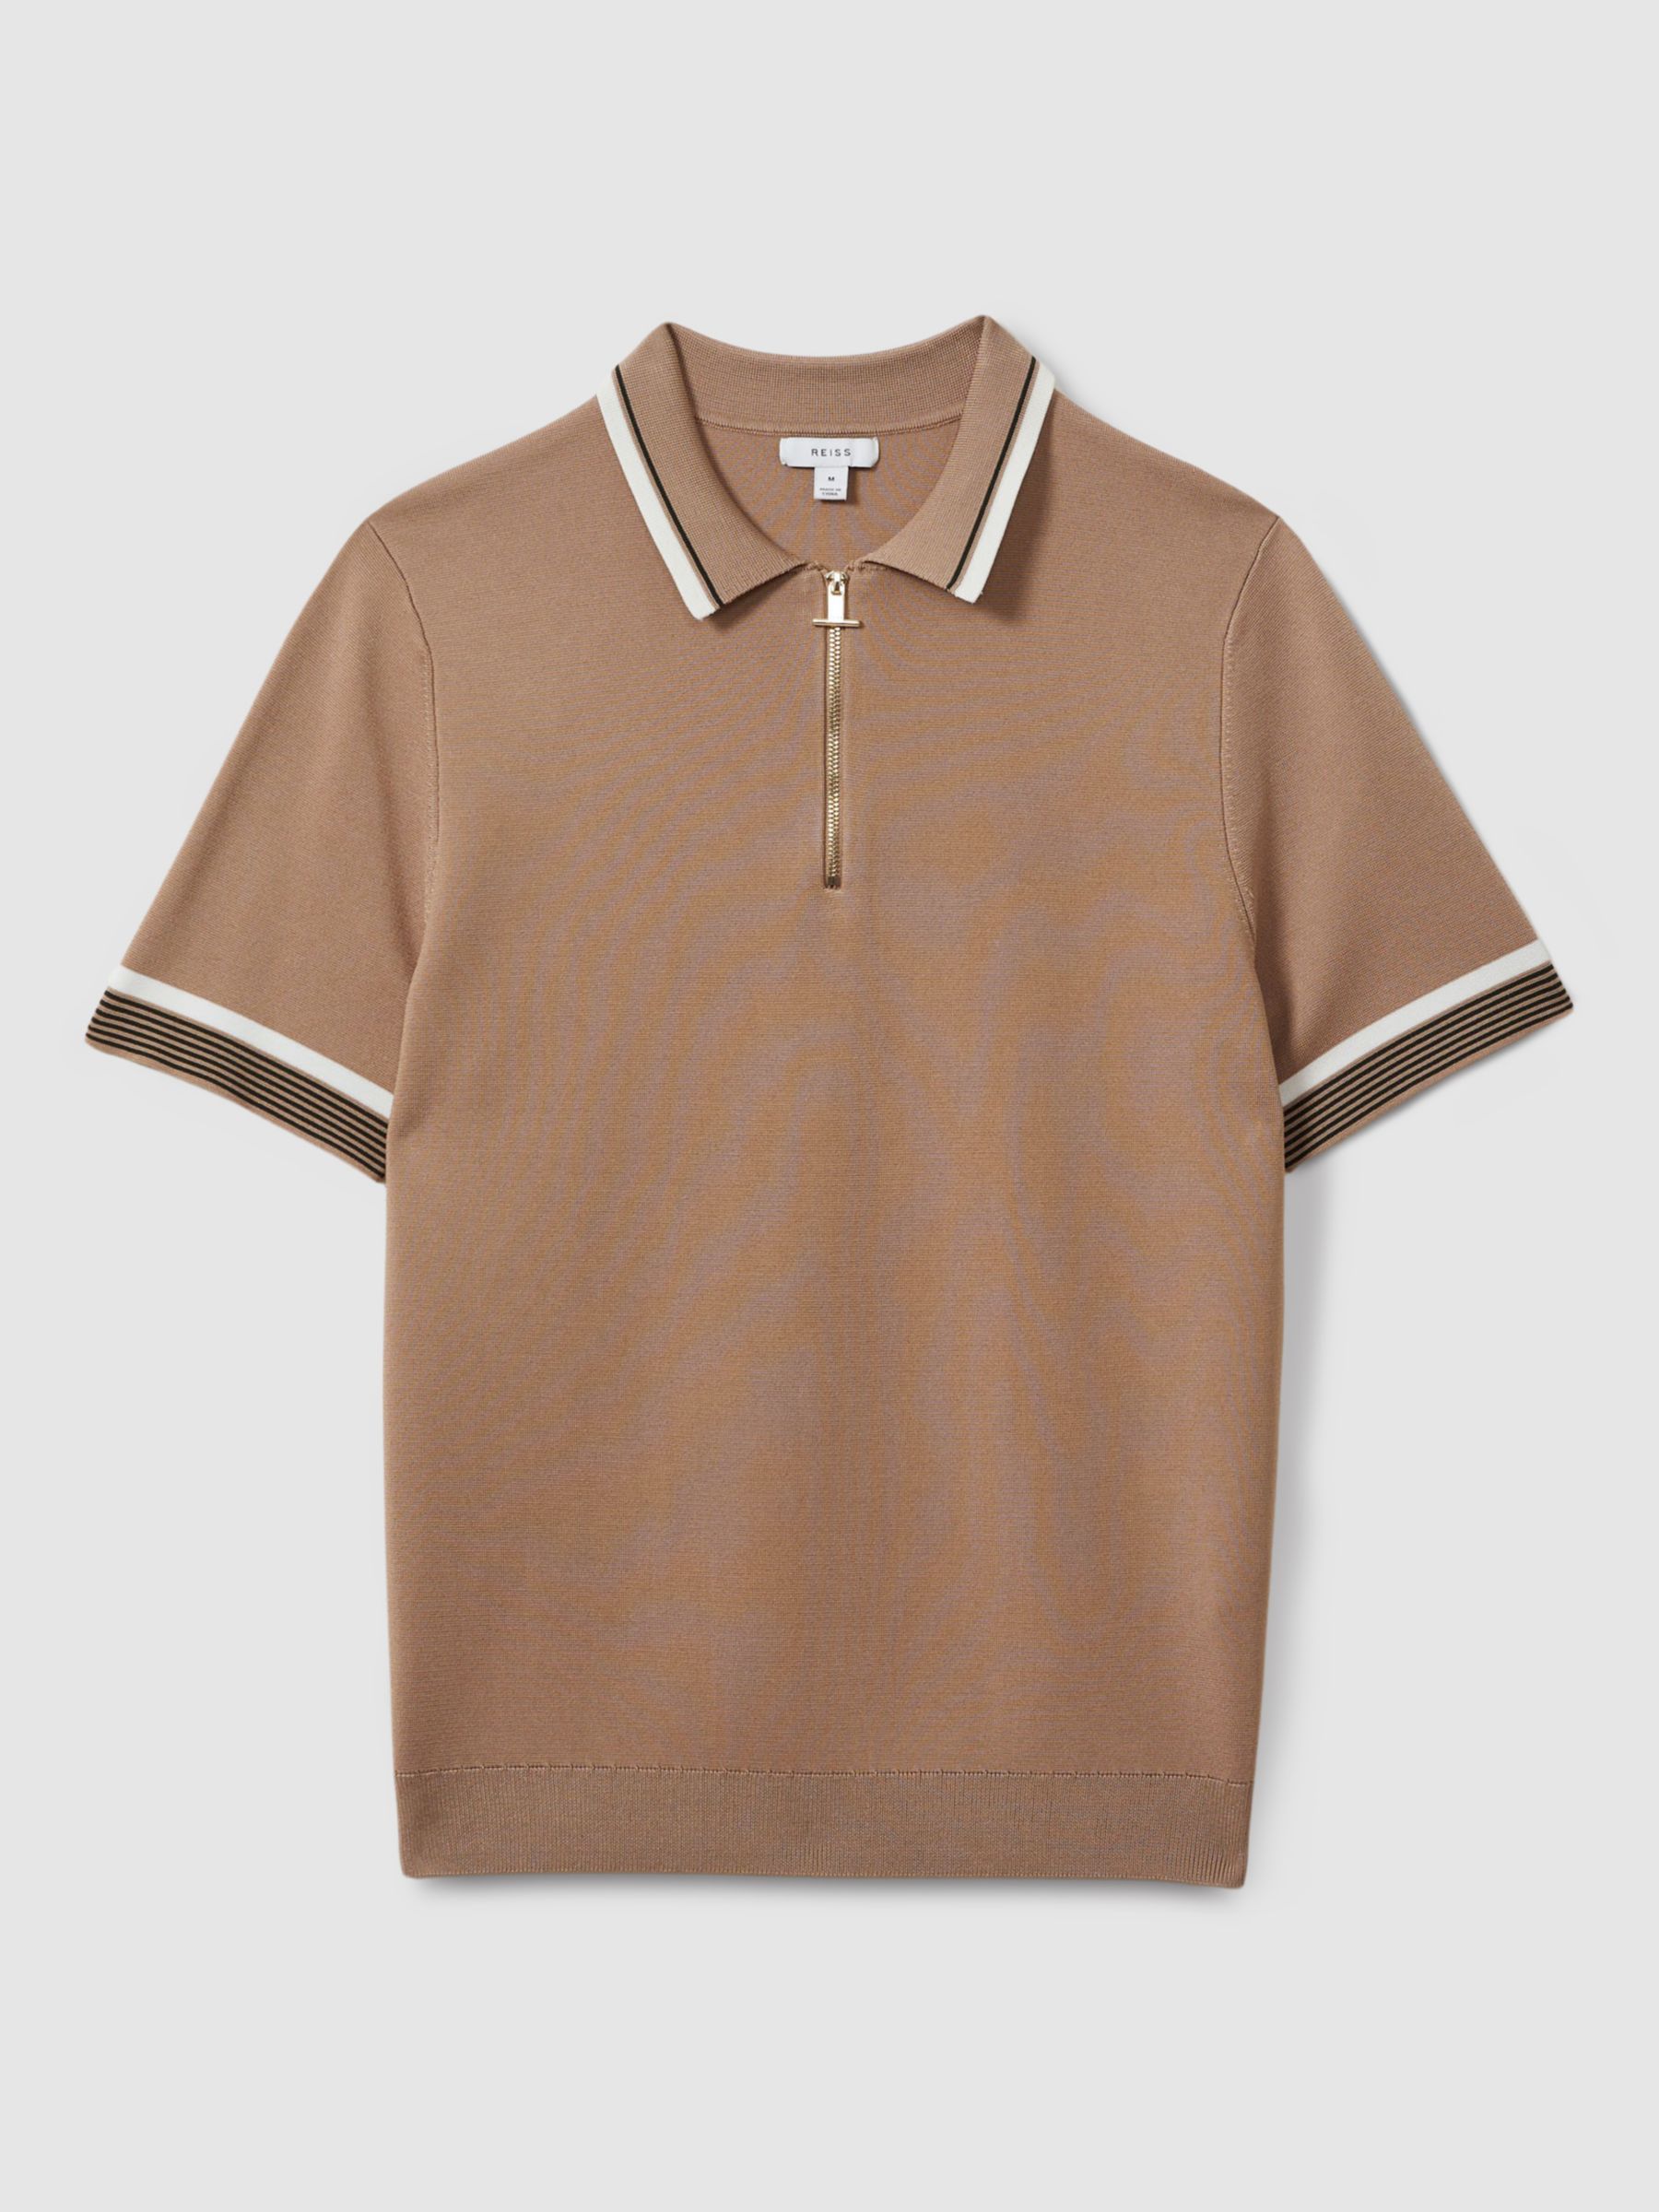 Buy Reiss Chelsea Short Sleeve Tipped Half Zip Polo Top, Warm Taupe Online at johnlewis.com